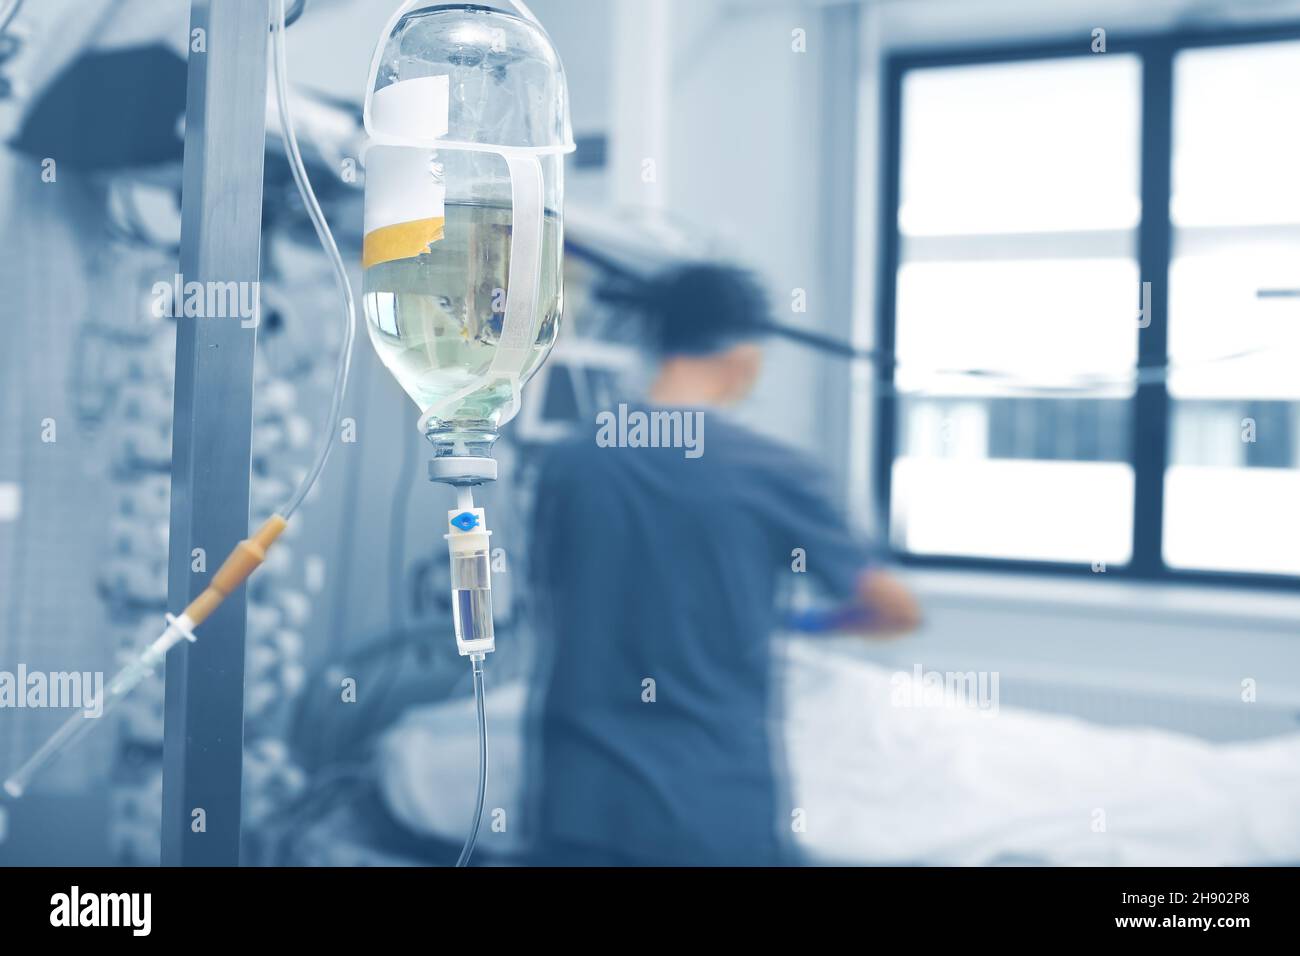 Intravenous infusion bottle hanging on the pole agienst the blurred silhouette of male medical worker. Stock Photo